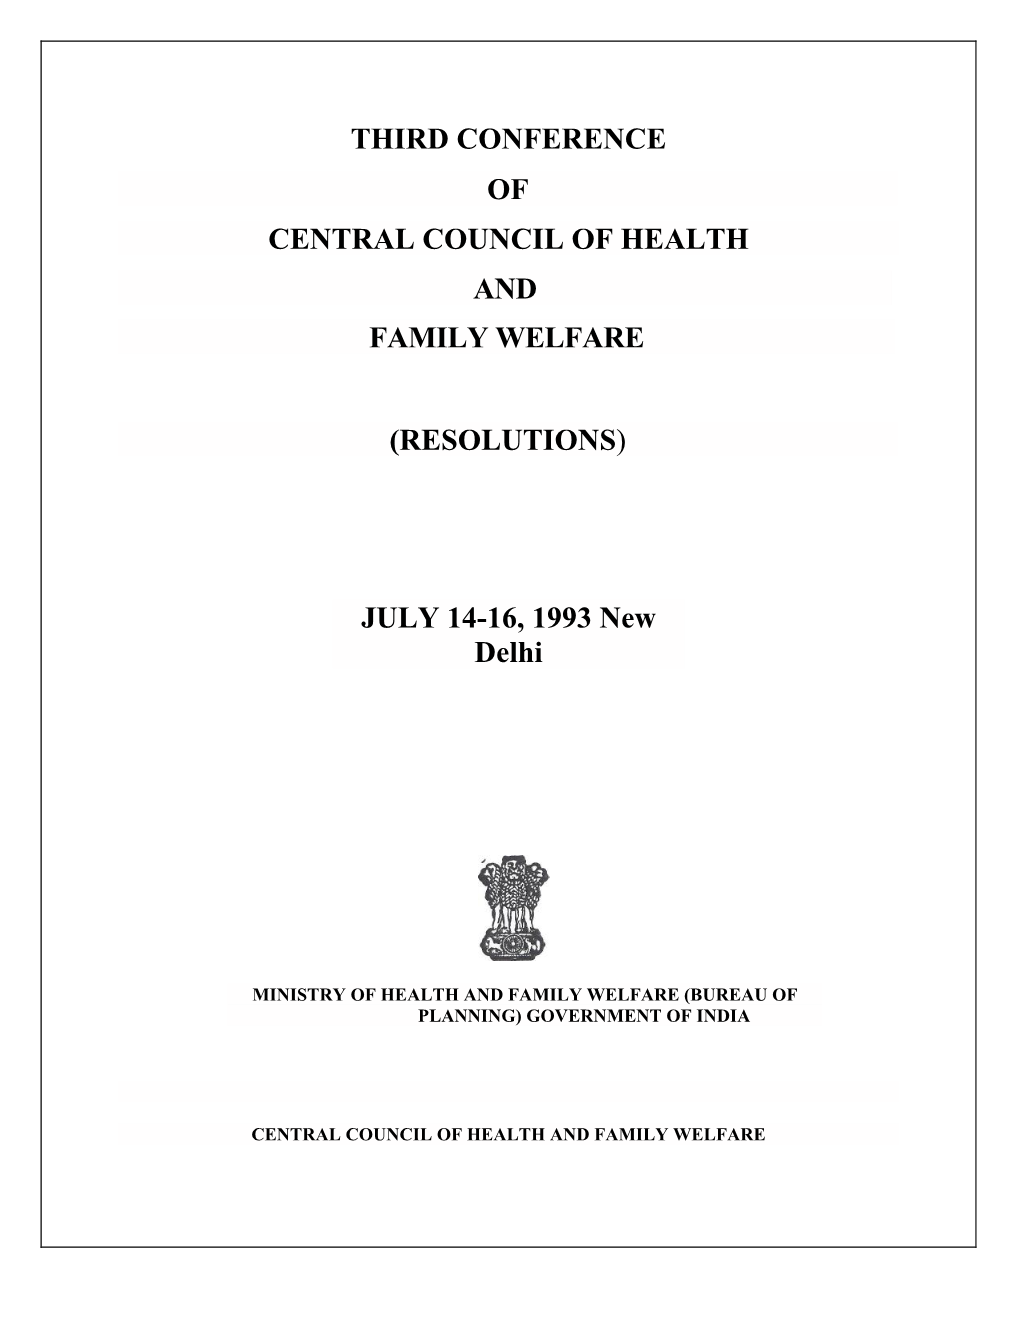 Third Conference of Central Council of Health and Family Welfare